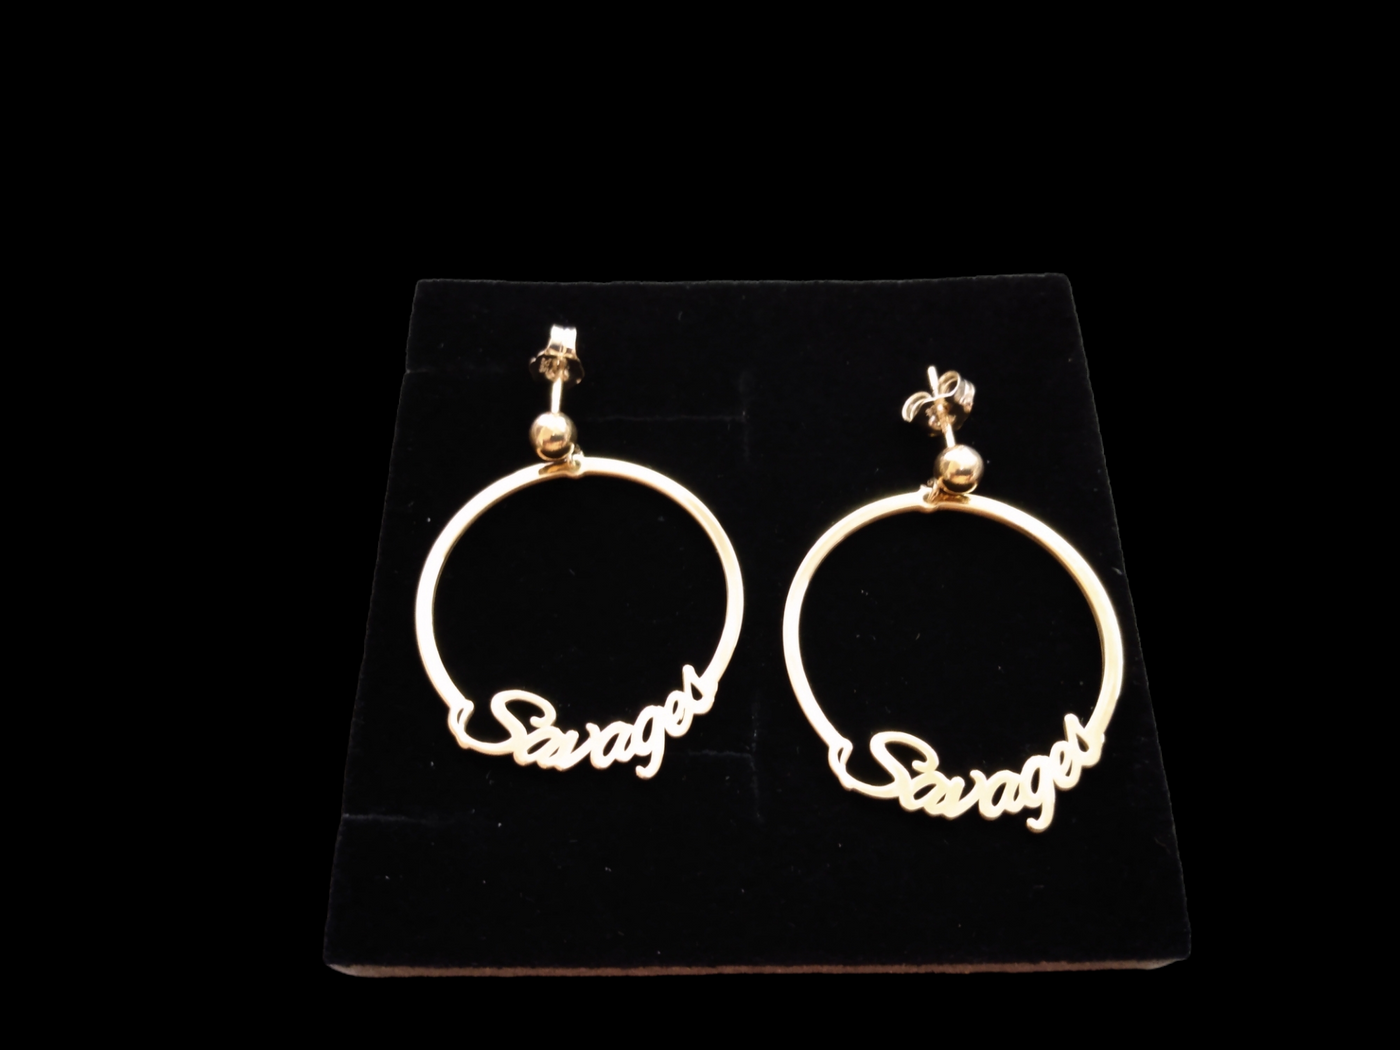 Sterling Silver/Gold Plated Savage Earrings